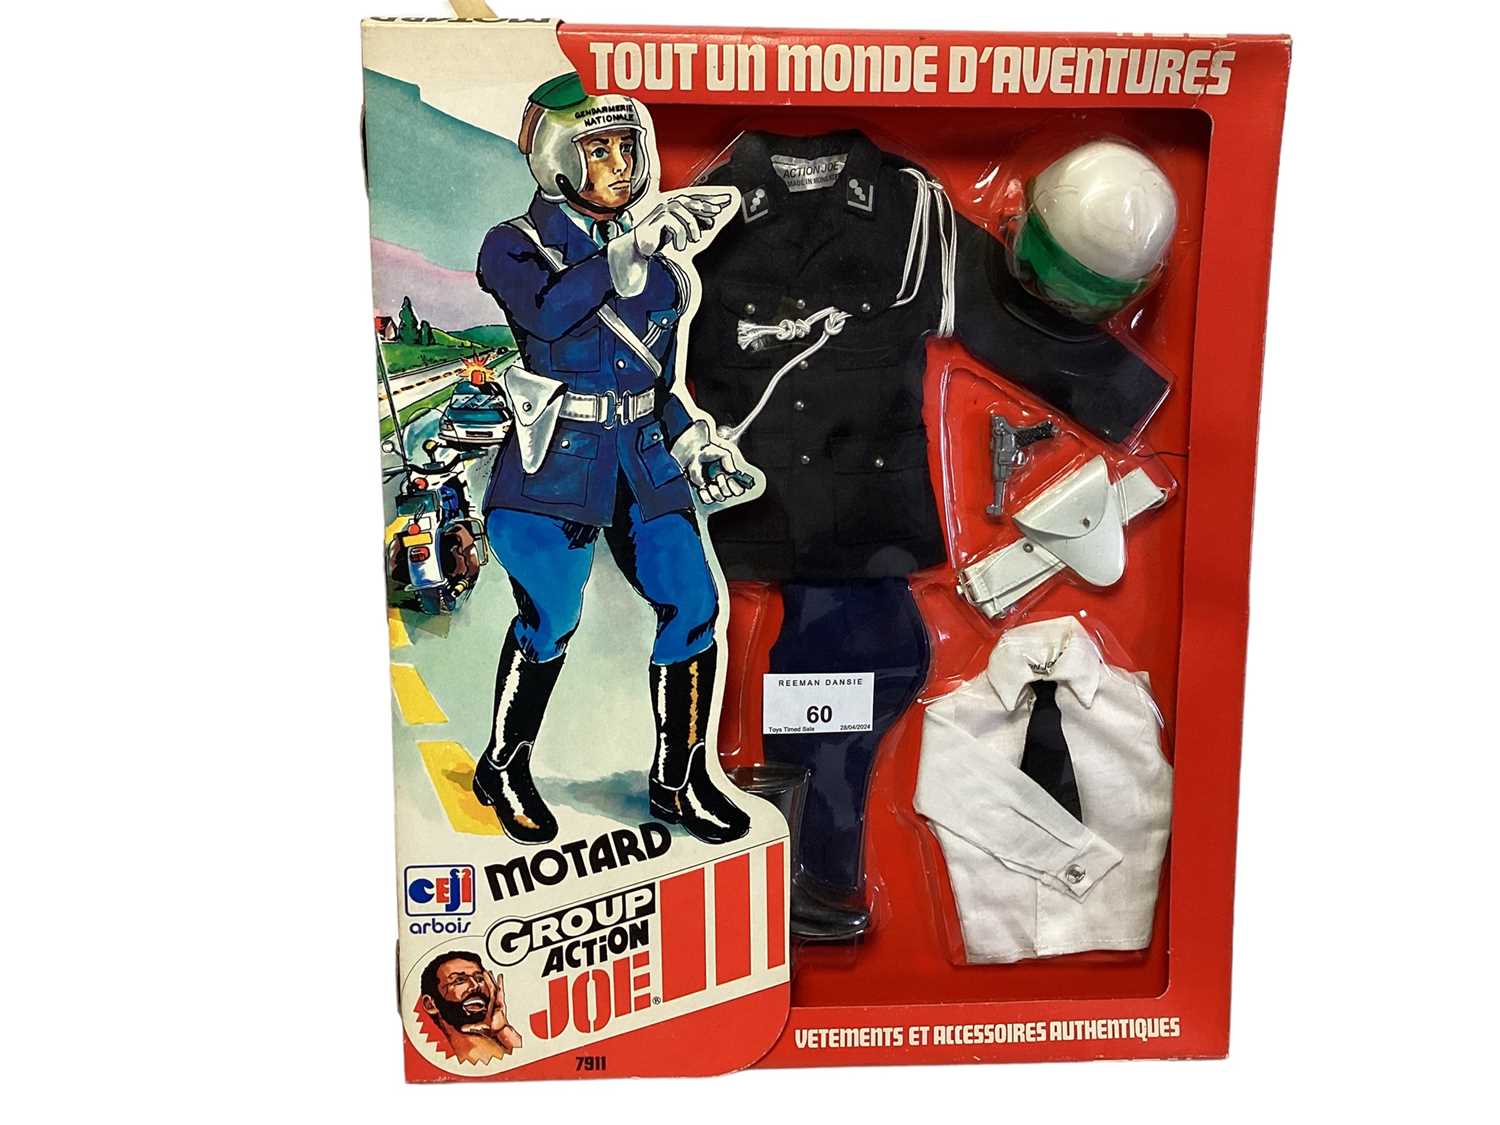 Lot 60 - CEJI Arbois French Version Hasbro Group Action Joe Motard 12" action figure outfit, Boxed No.7911 (1)